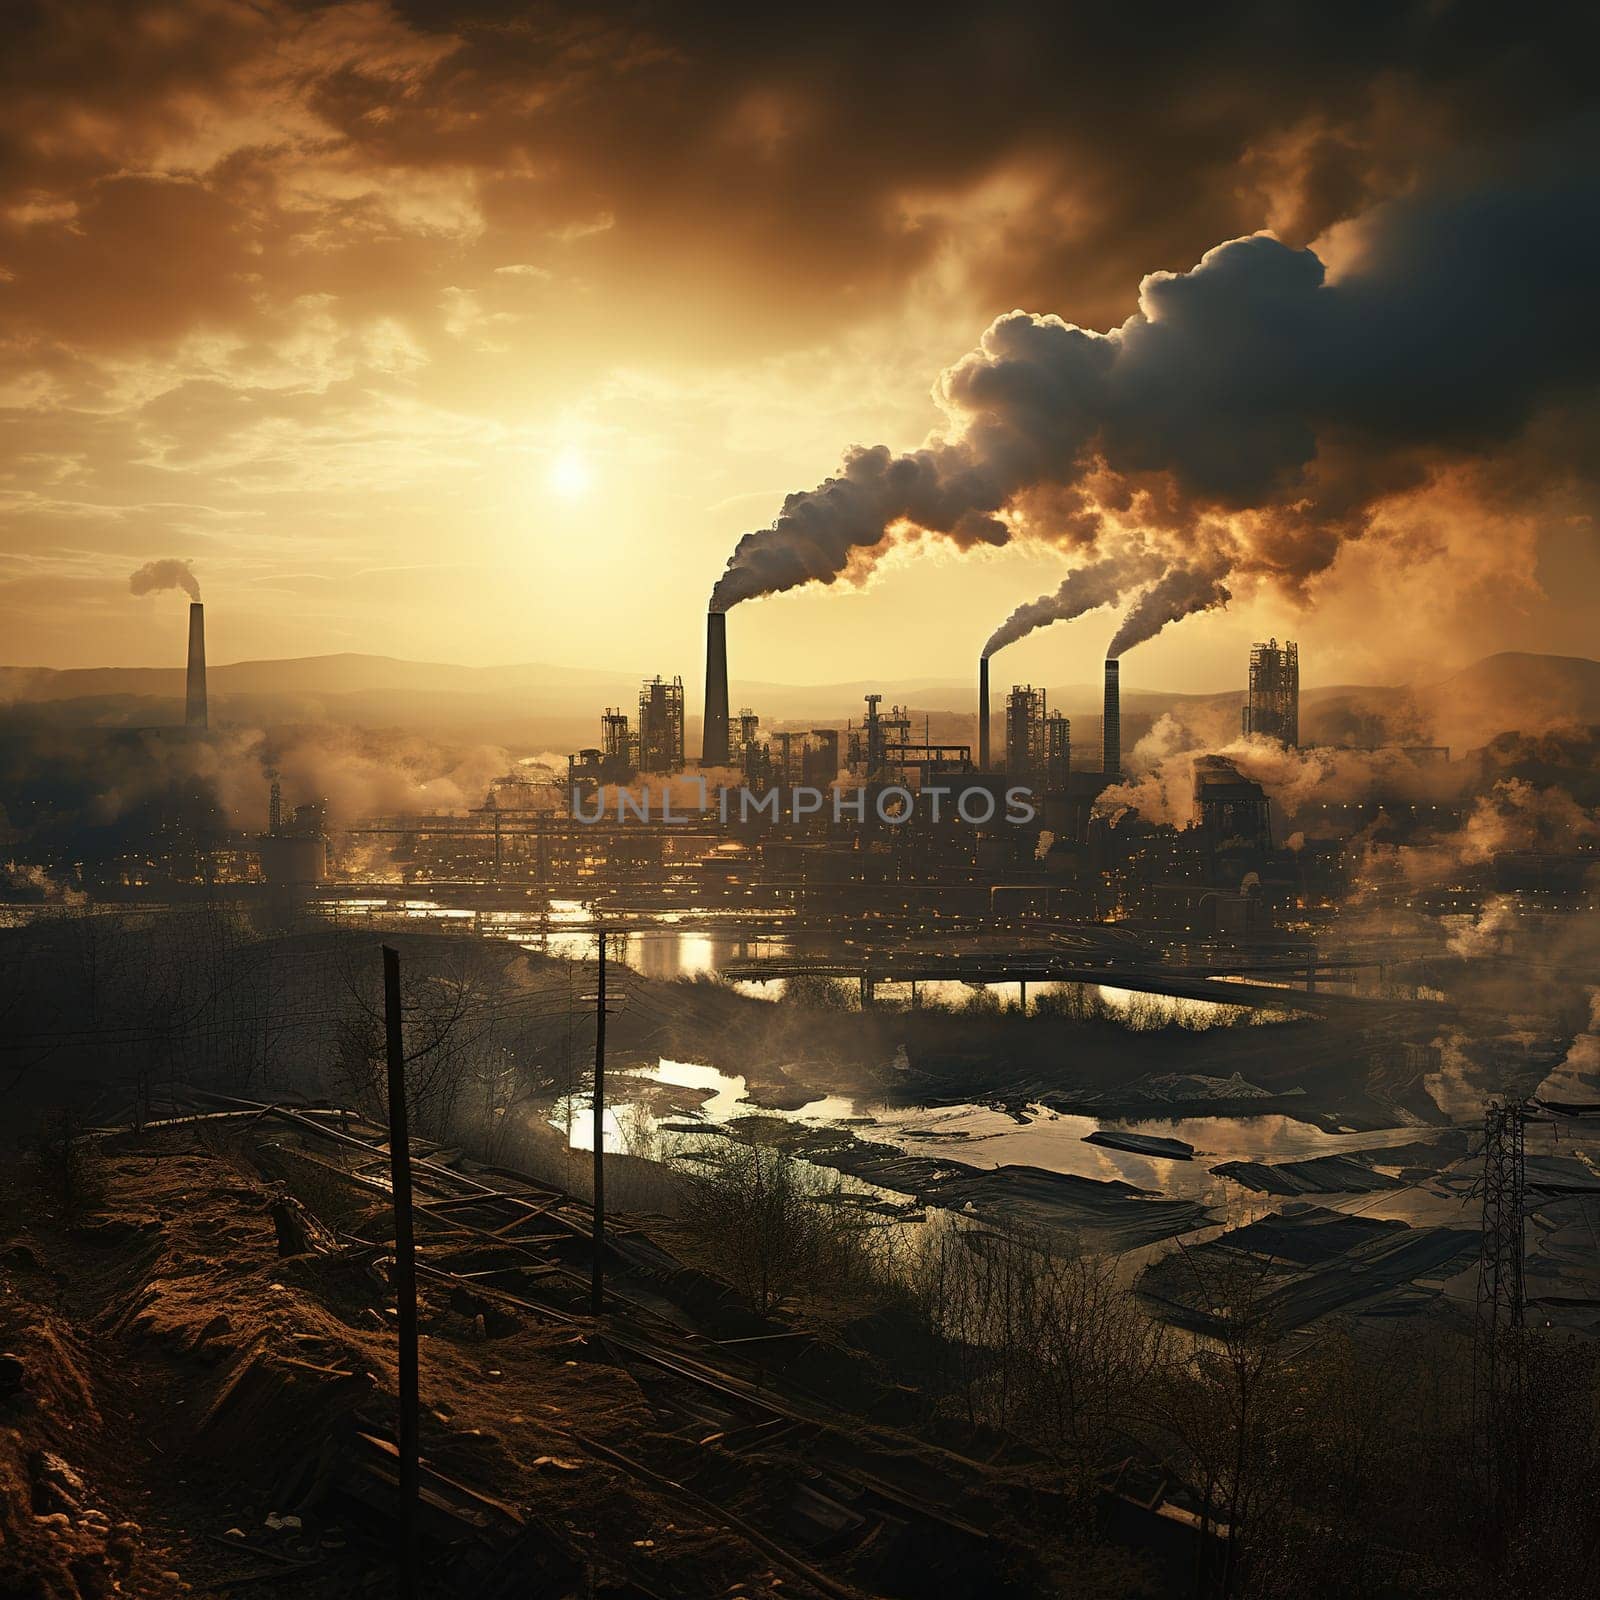 Heavy industrial factories producing a smog polluting the environment, ecological issue